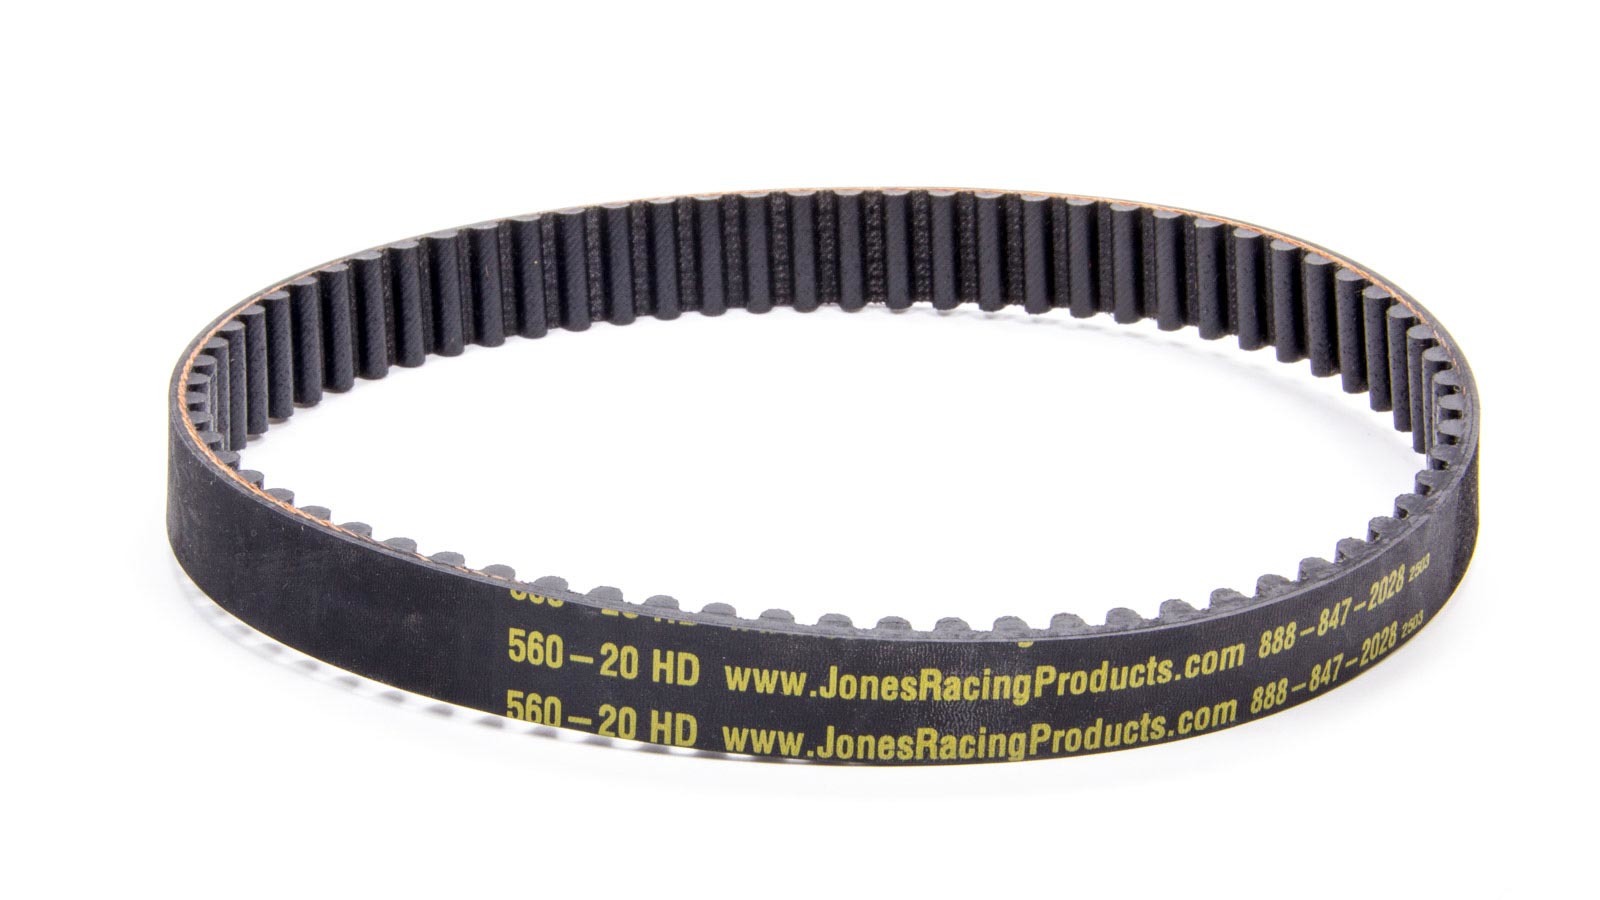 Jones Racing Products 560-20HD HTD Drive Belt, 22.050 in Long, 20 mm Wide, 8 mm Pitch, Each